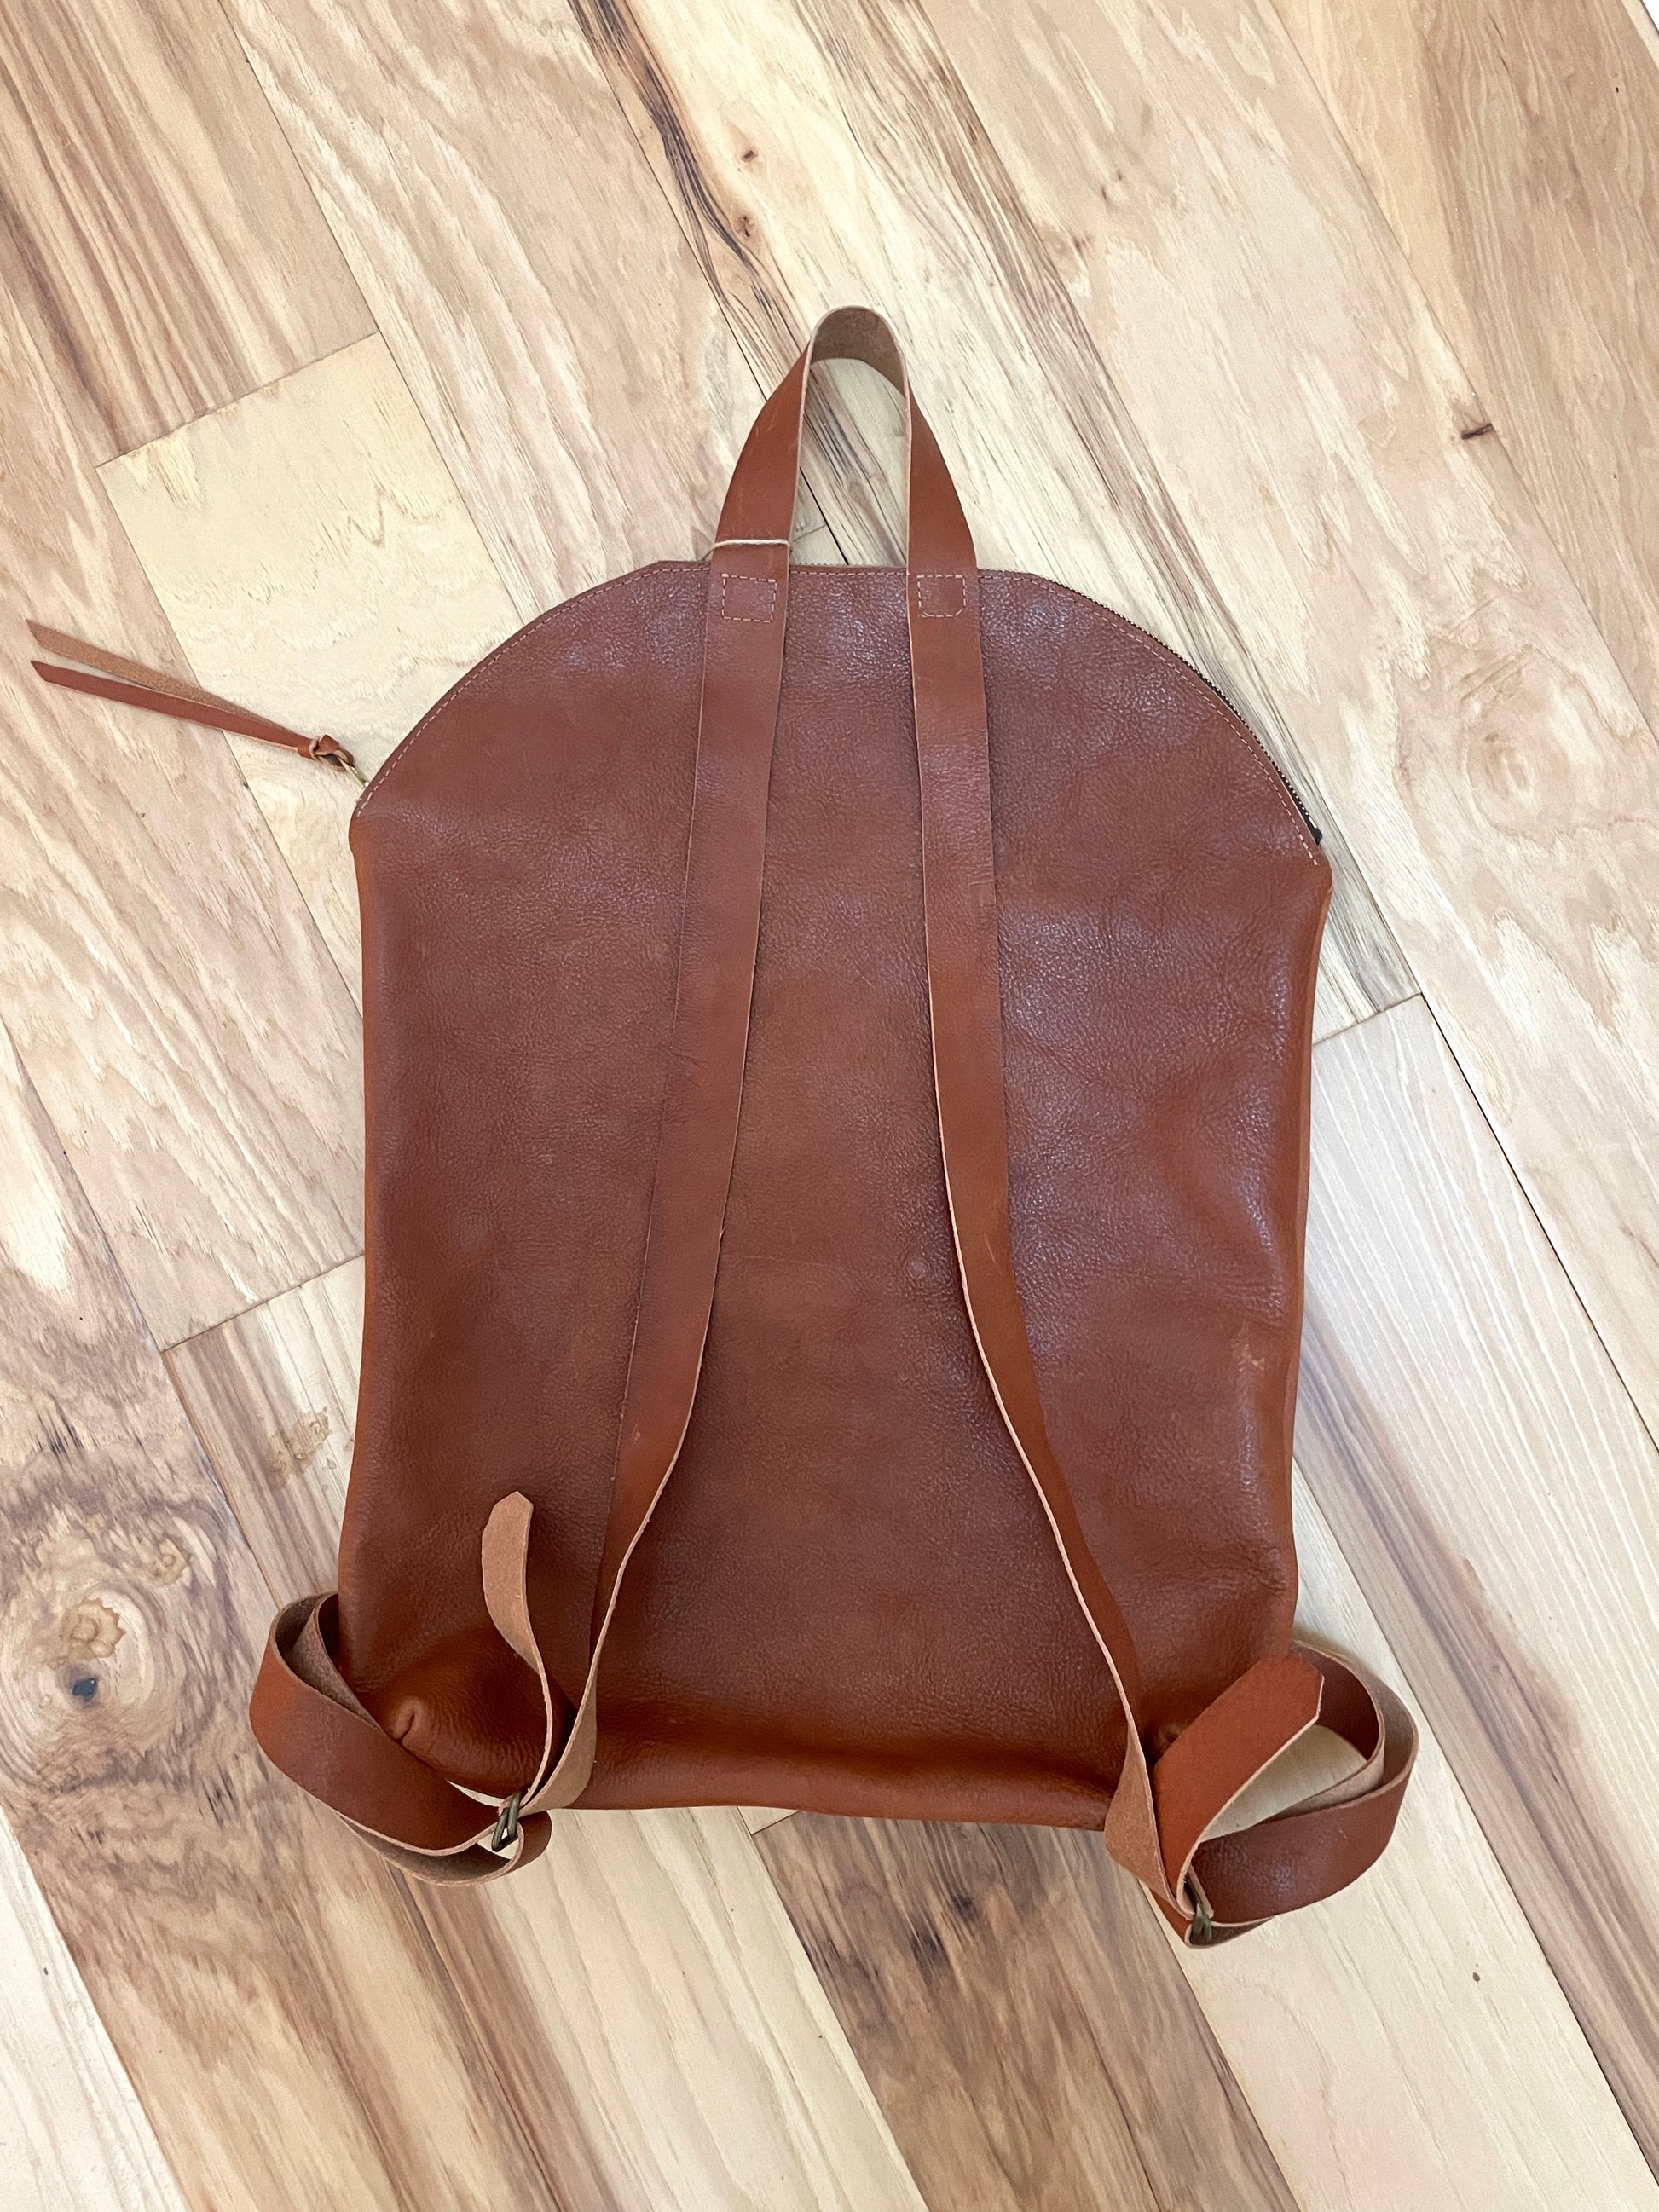 Last Chance: Large Zippered Backpack in Congac Leather Bag - handcrafted by Market Canvas Leather in Tofino, BC, Canada